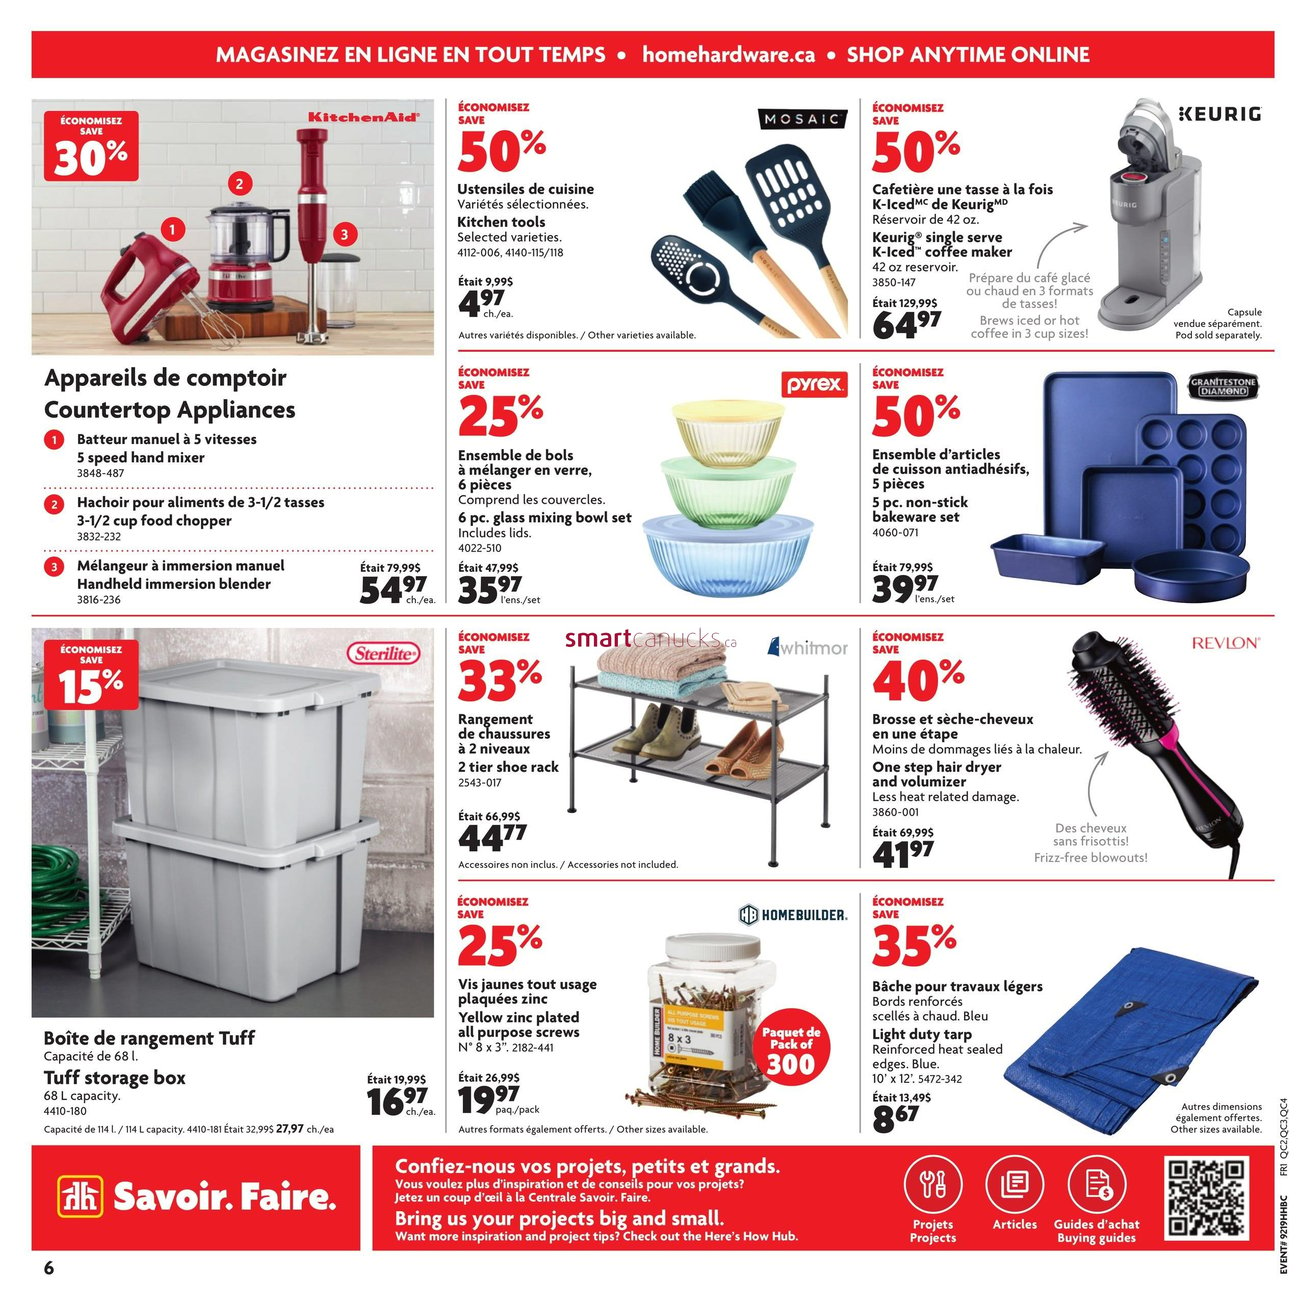 Home Hardware Building Centre - Quebec - 2 Weeks of Savings - Page 7